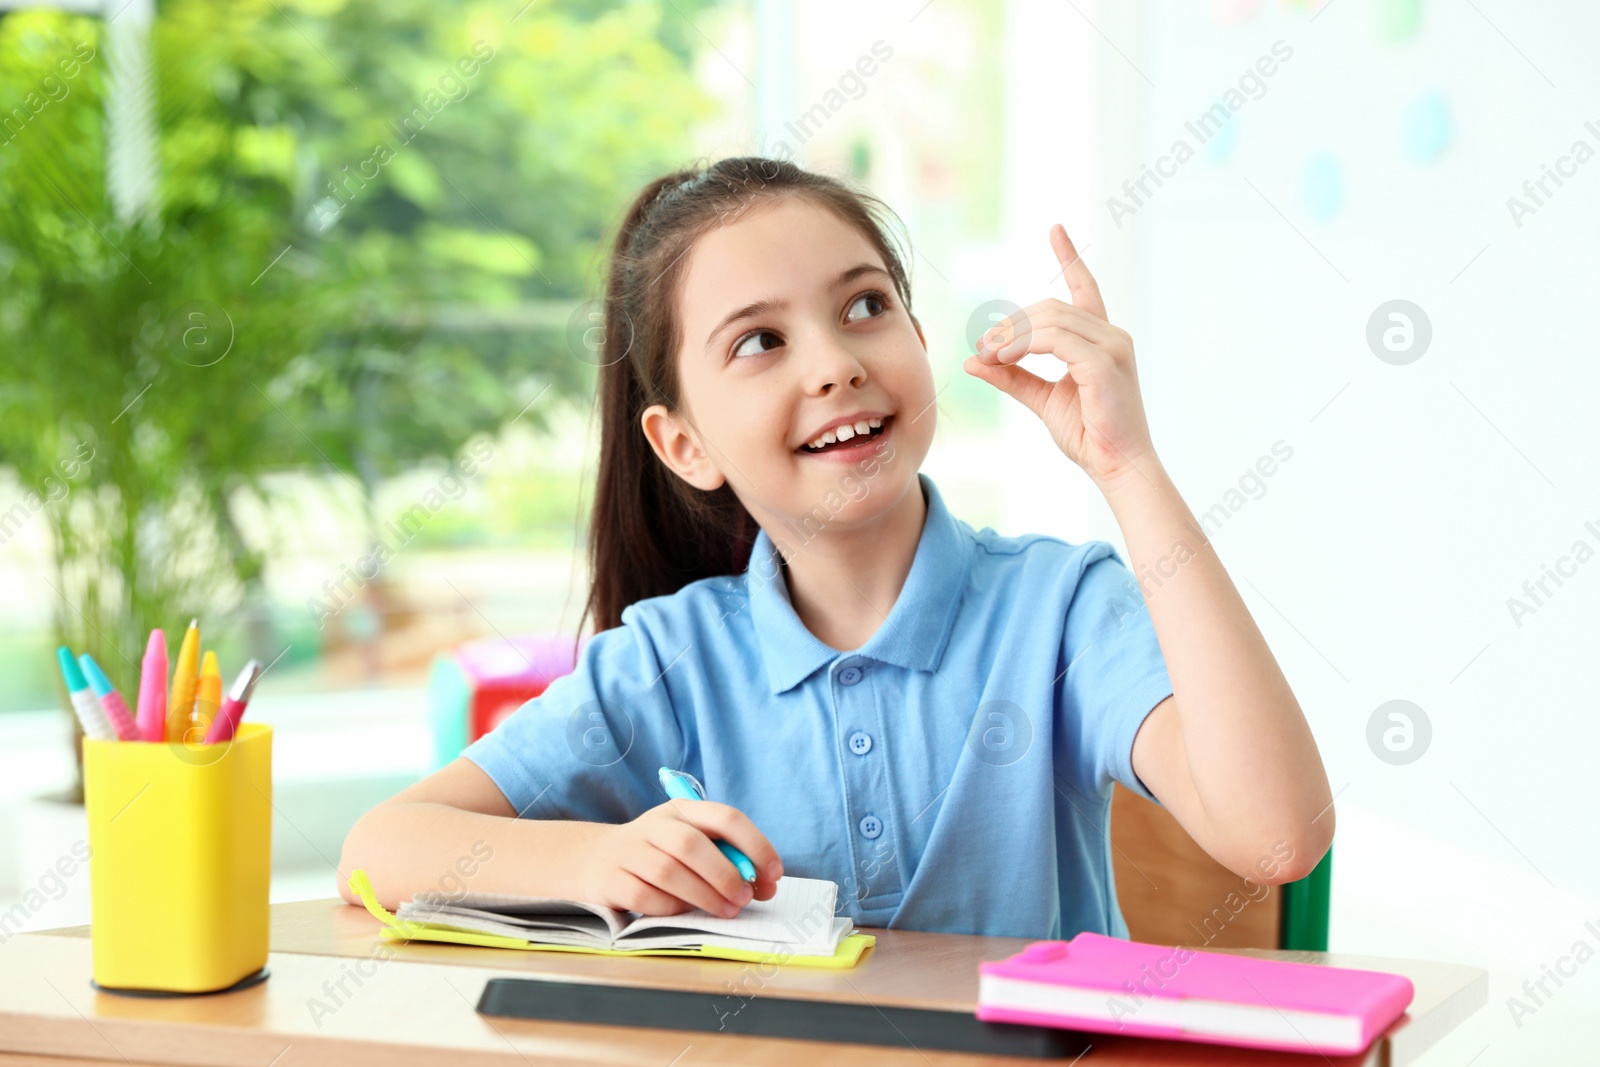 Photo of Smart little girl doing assignment at desk in classroom. School stationery